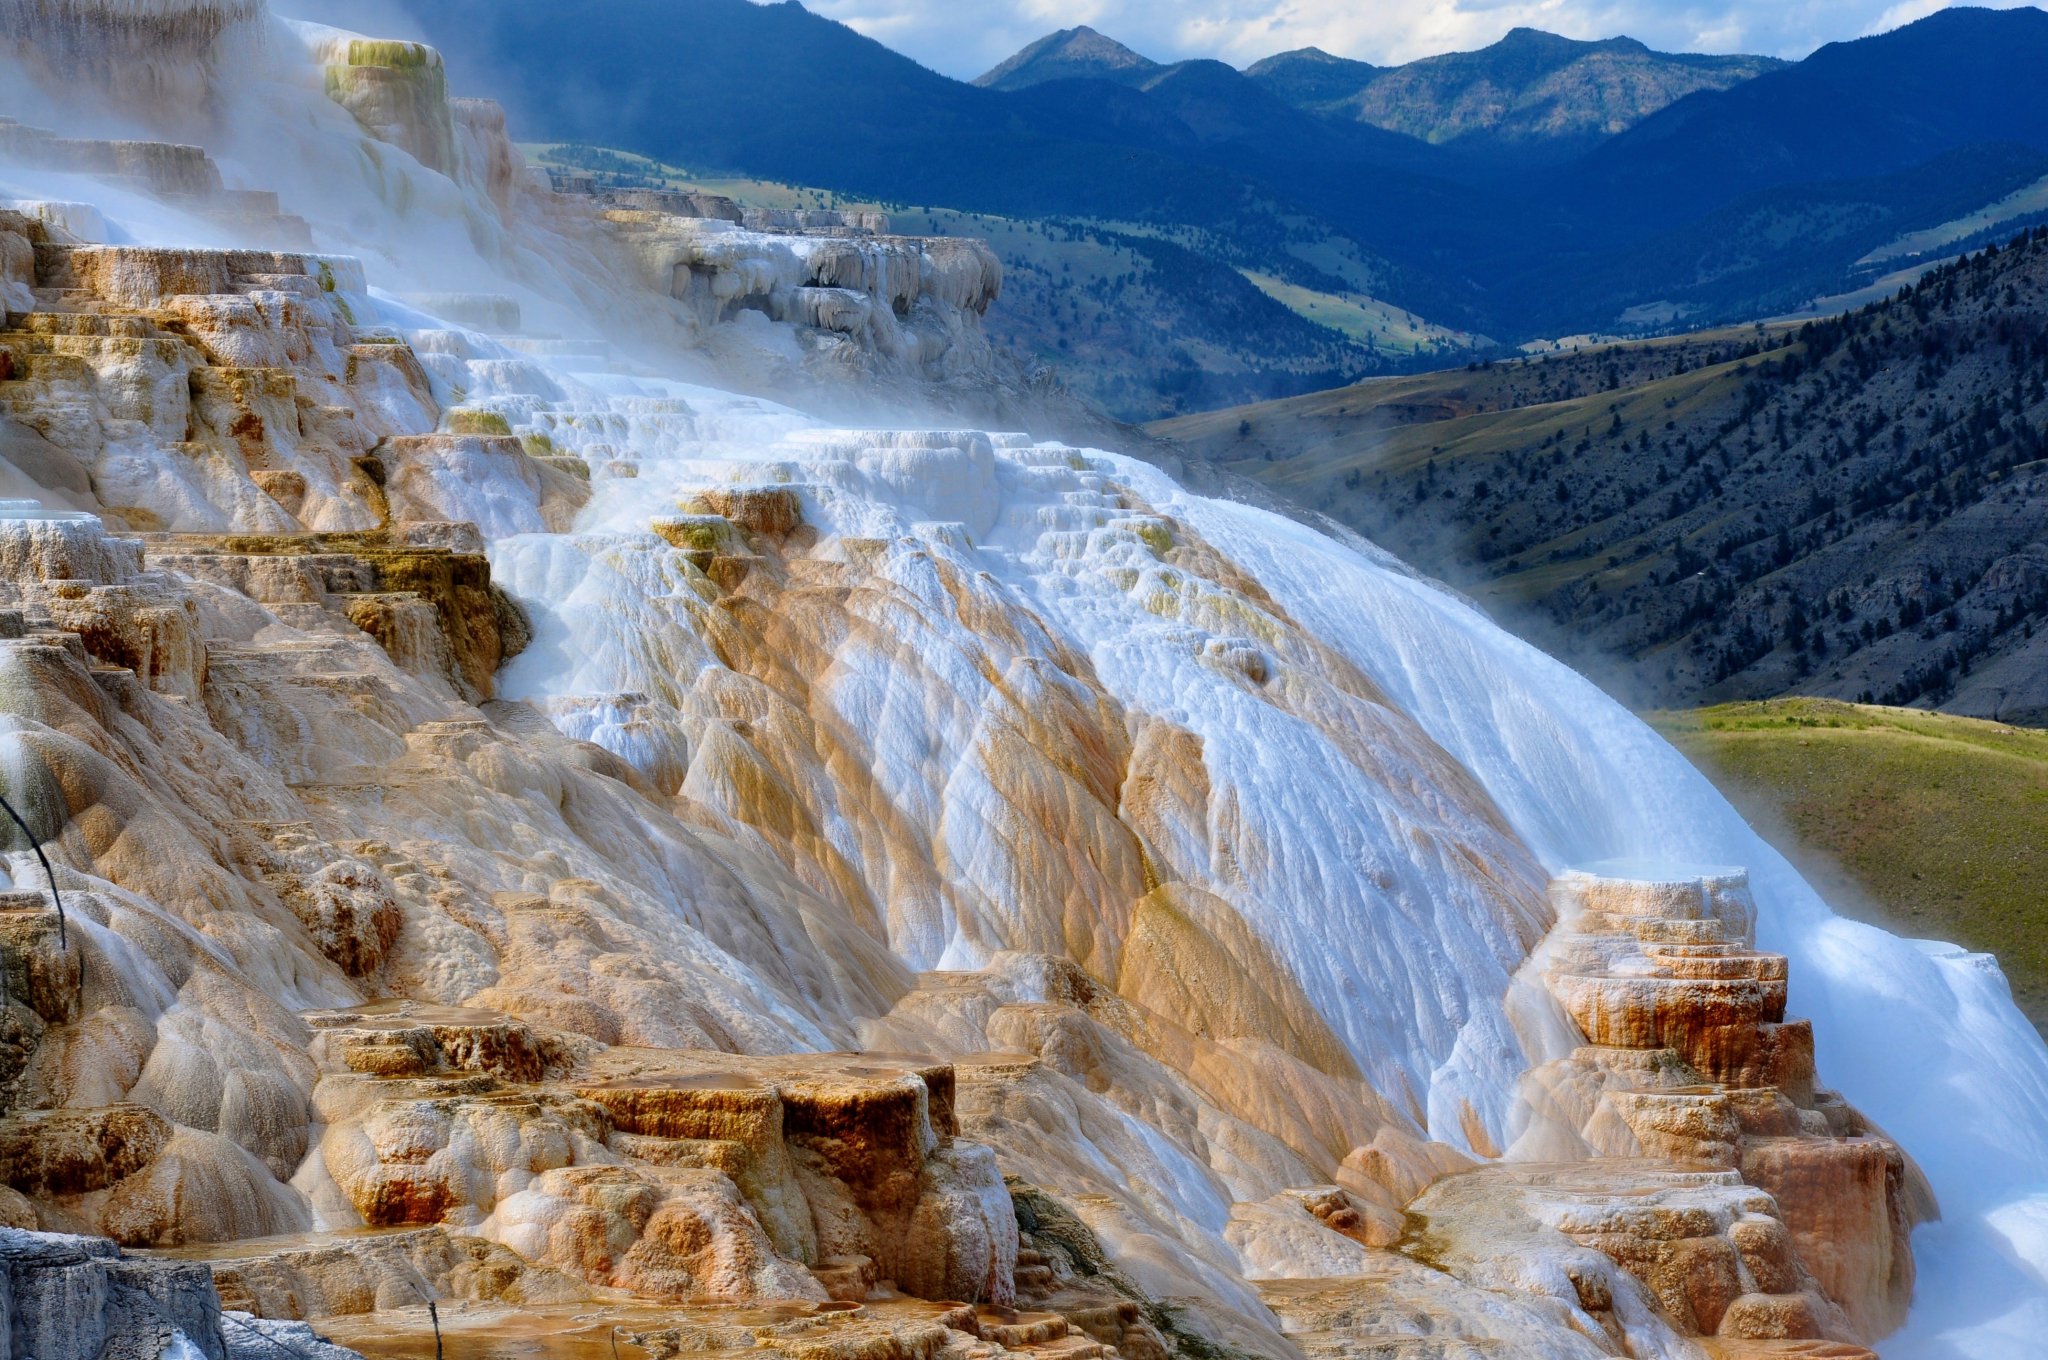 How to Visit Yellowstone National Park on a Budget - Dollar Flight Club